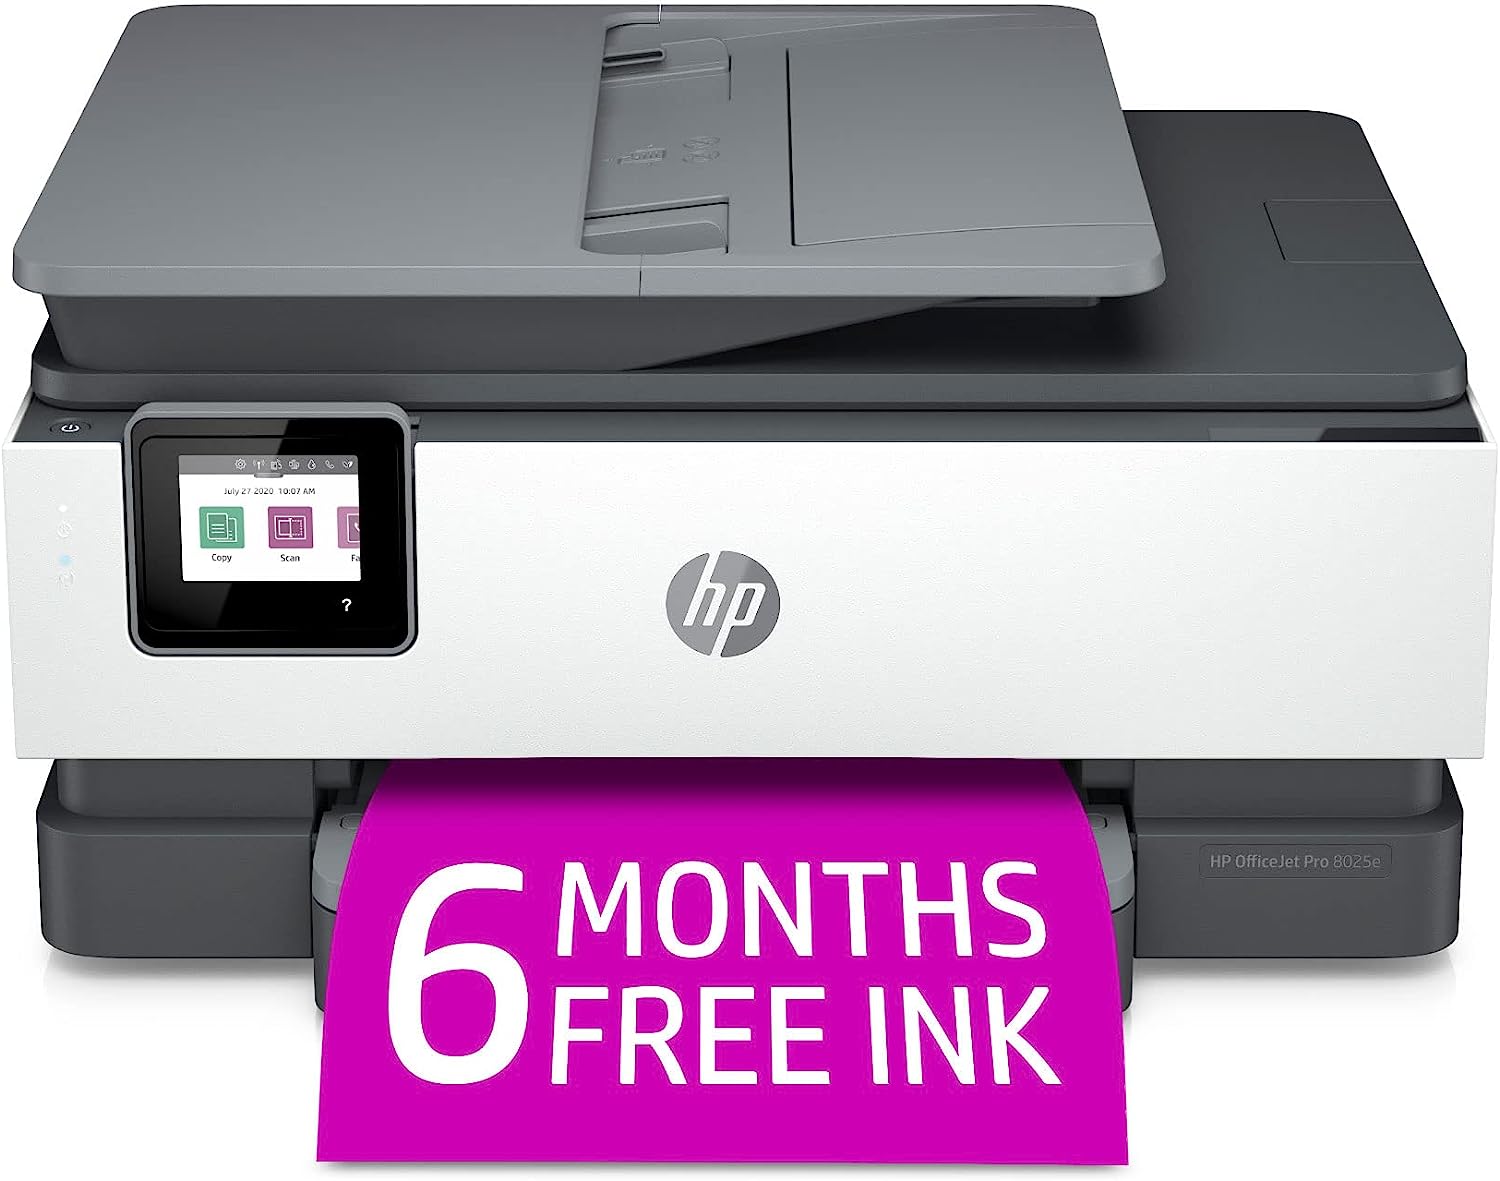 HP OfficeJet Pro 8025e Wireless Color All-in-One [...]